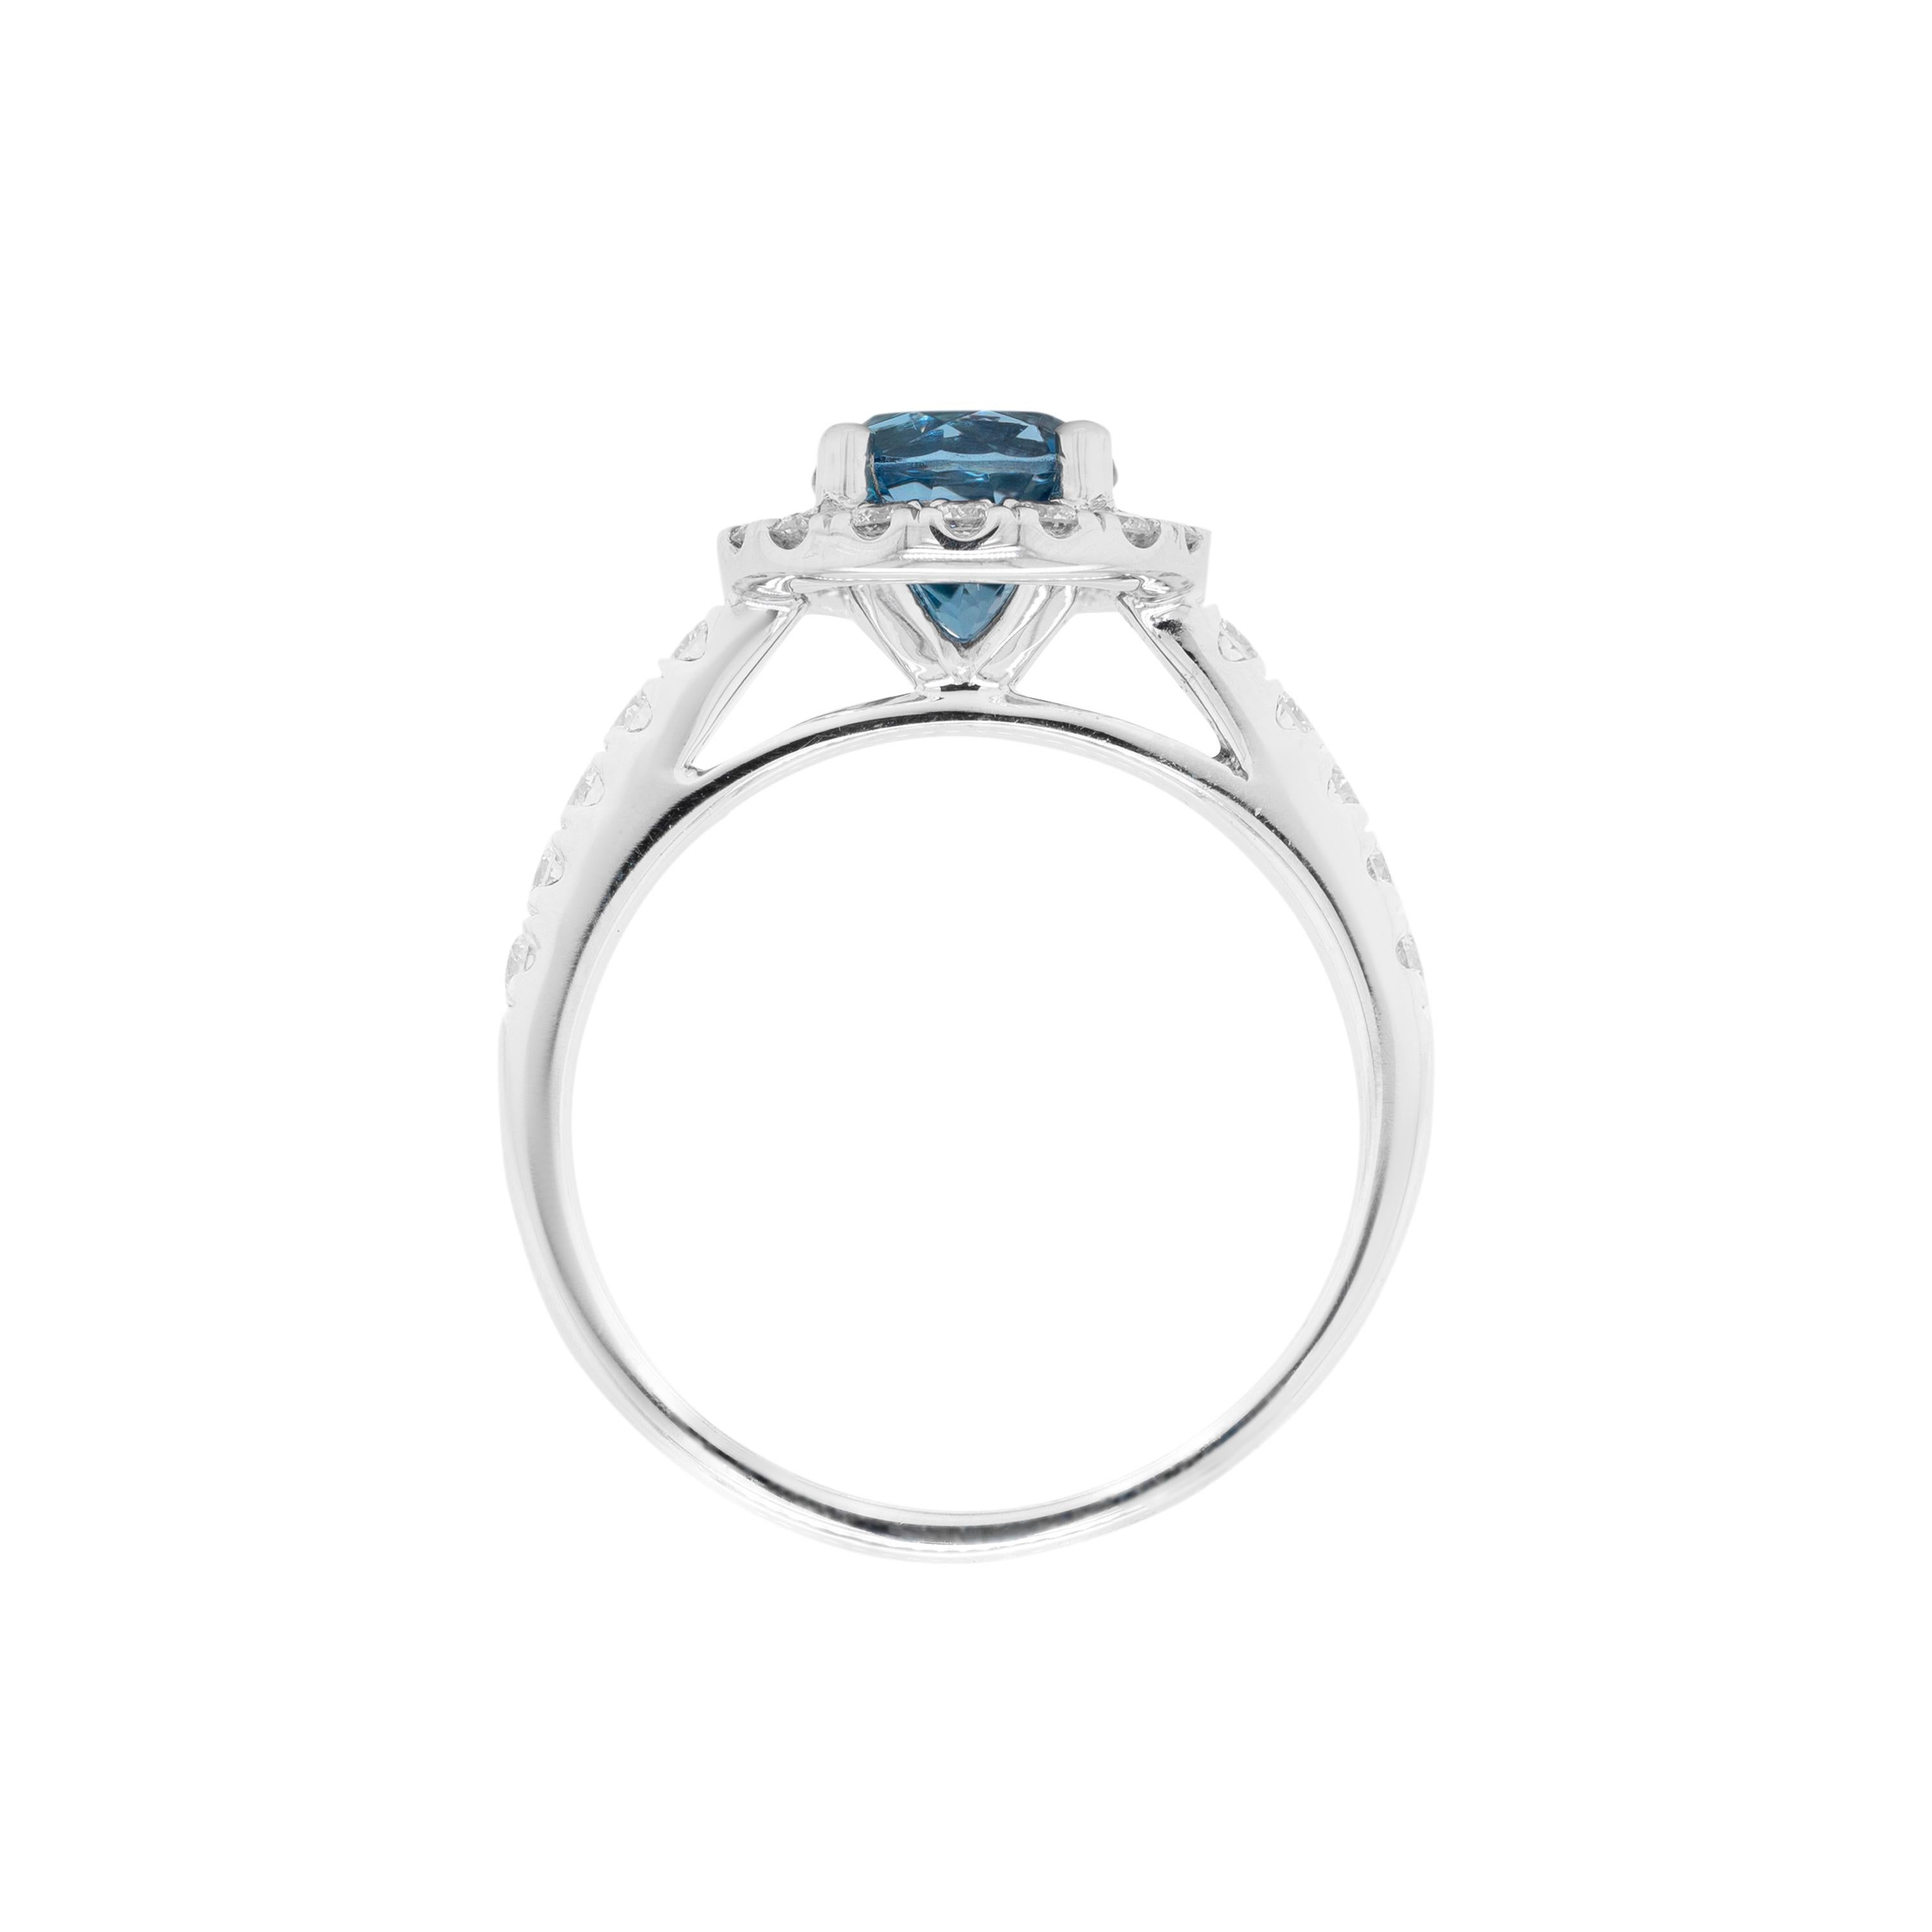 This stunning cluster engagement ring features a beautiful round aquamarine weighing 1.10ct, mounted in a four claw, open back setting. The vibrant stone is surrounded by a halo of 16 round brilliant cut diamonds sat atop a delicate mount with 5